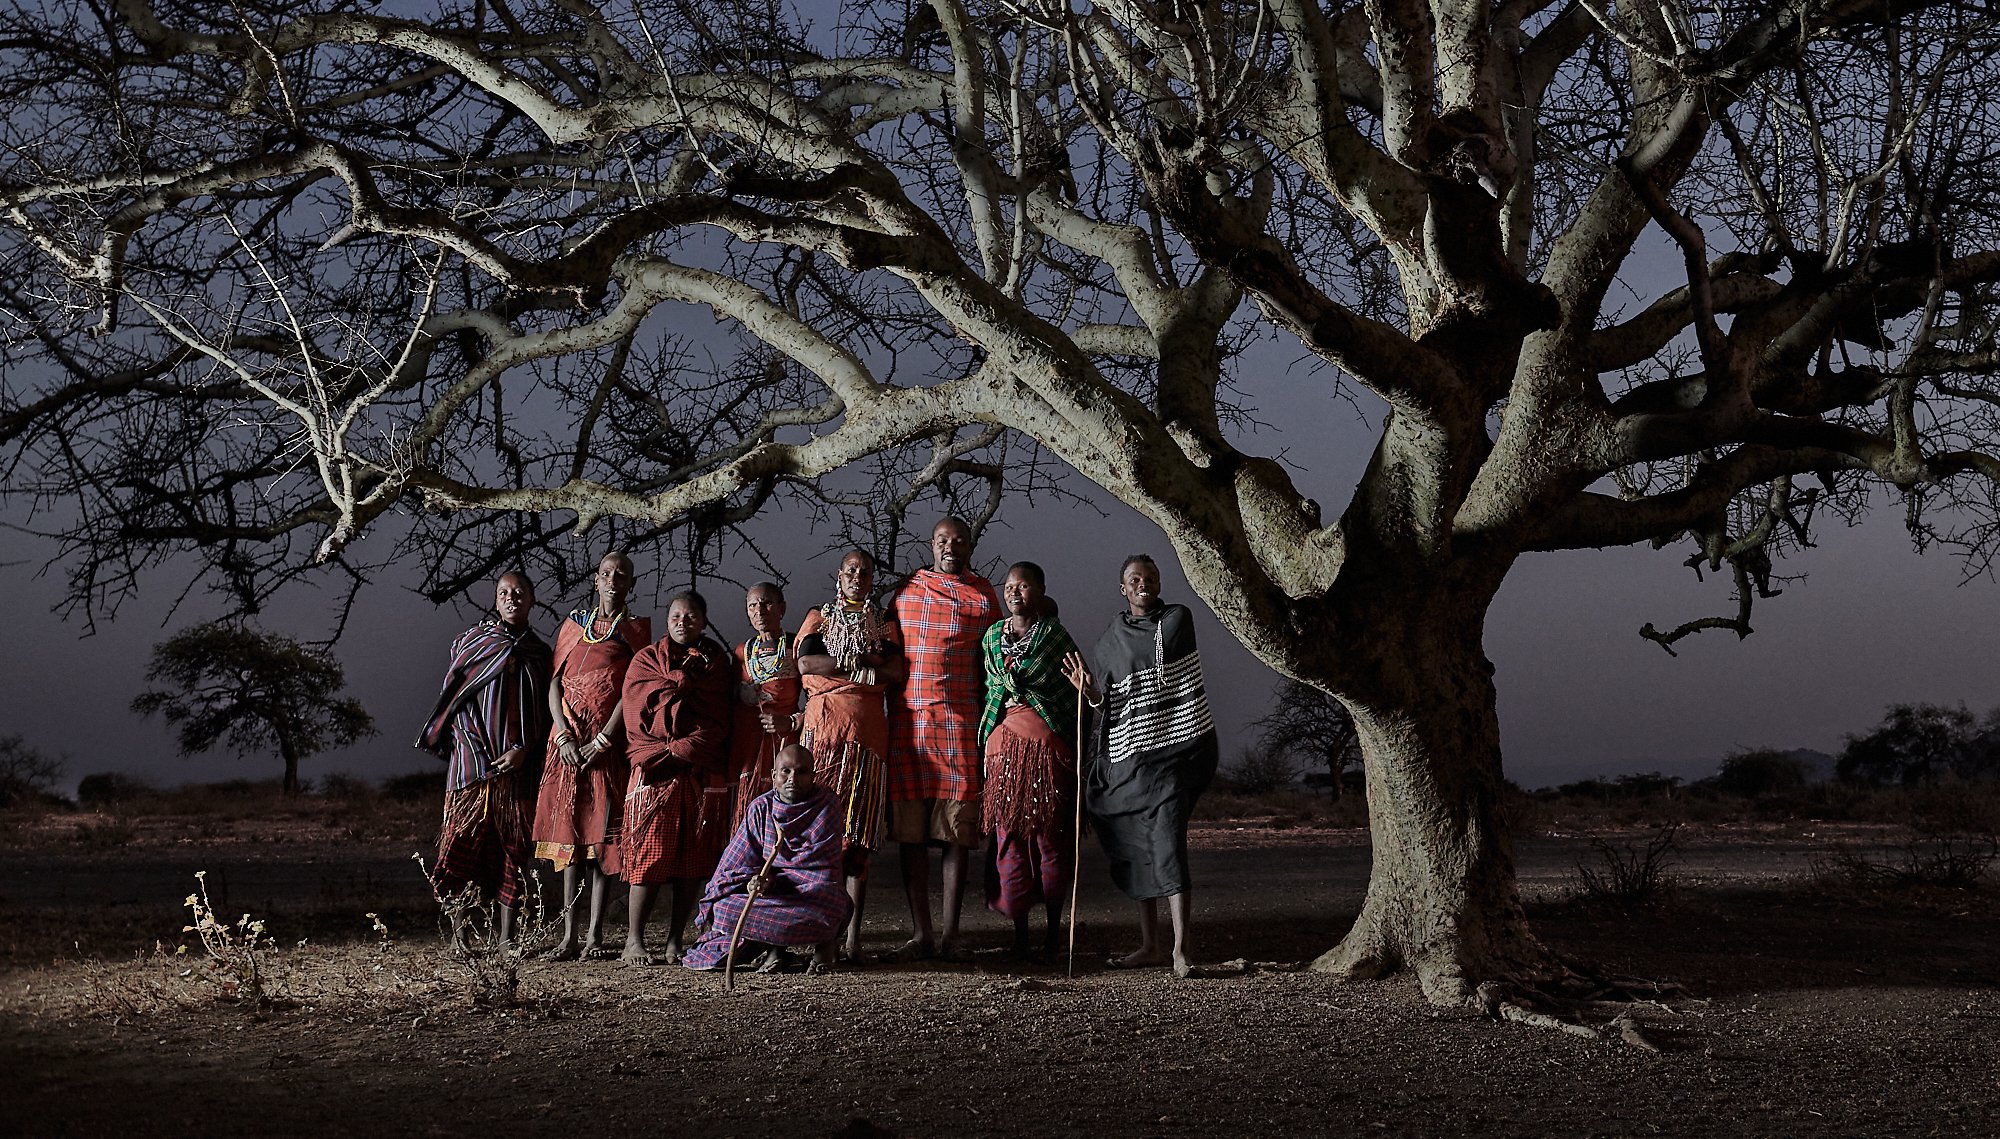 Members of the Datoga tribe just before dawn under the sacred village tree